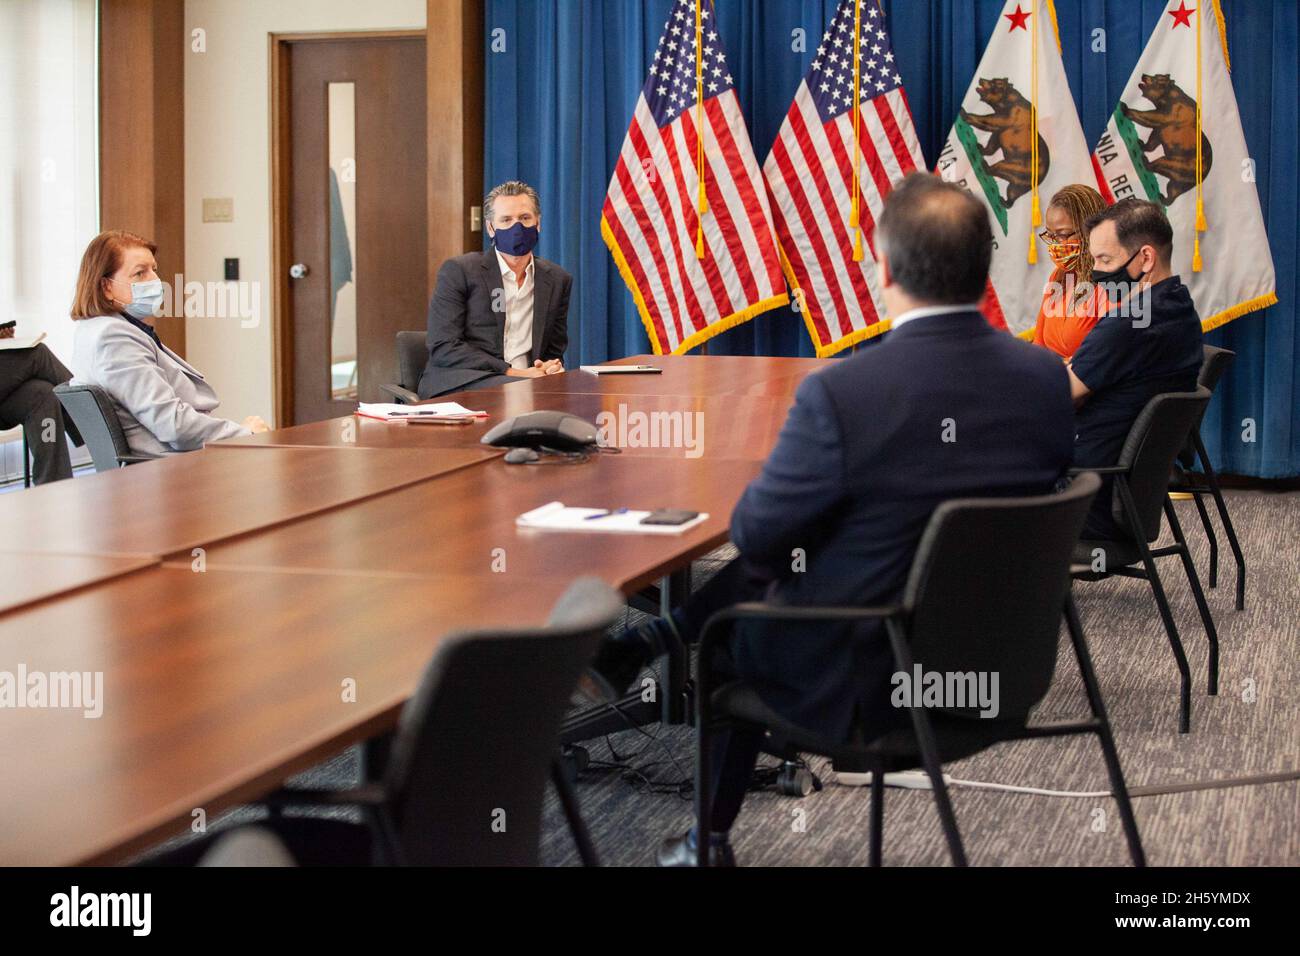 Gavin Newsom meets with Toni Atkins, Anthony Rendon, Holly J. Mitchell and Phil Ting to discuss California budget ca. 15 May 2020 Stock Photo